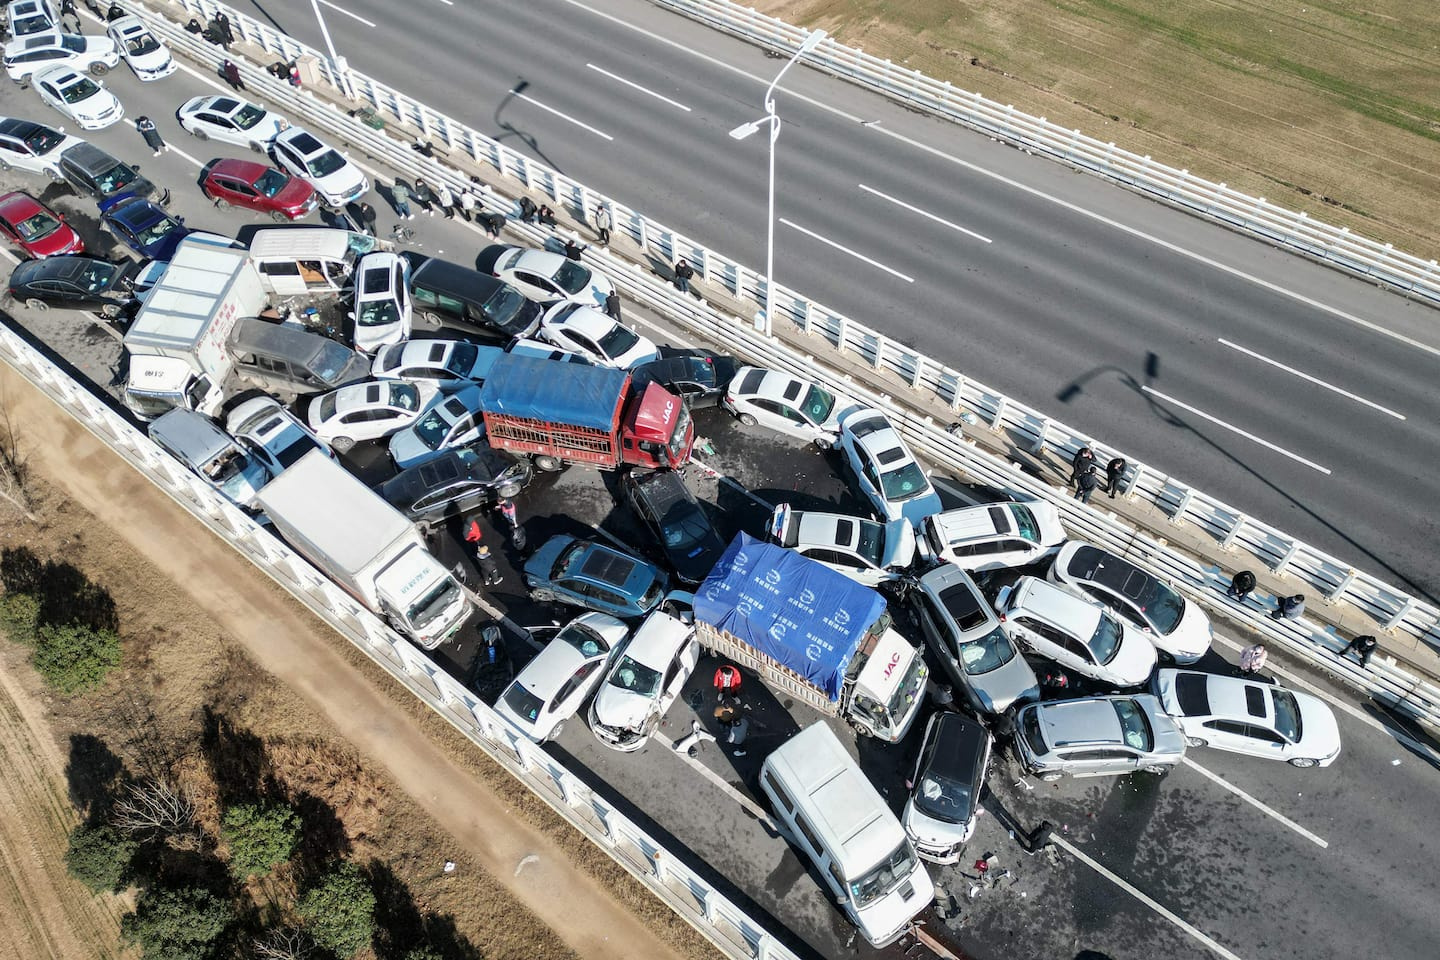 [IN IMAGES] Hundreds of vehicles involved in a pileup in China